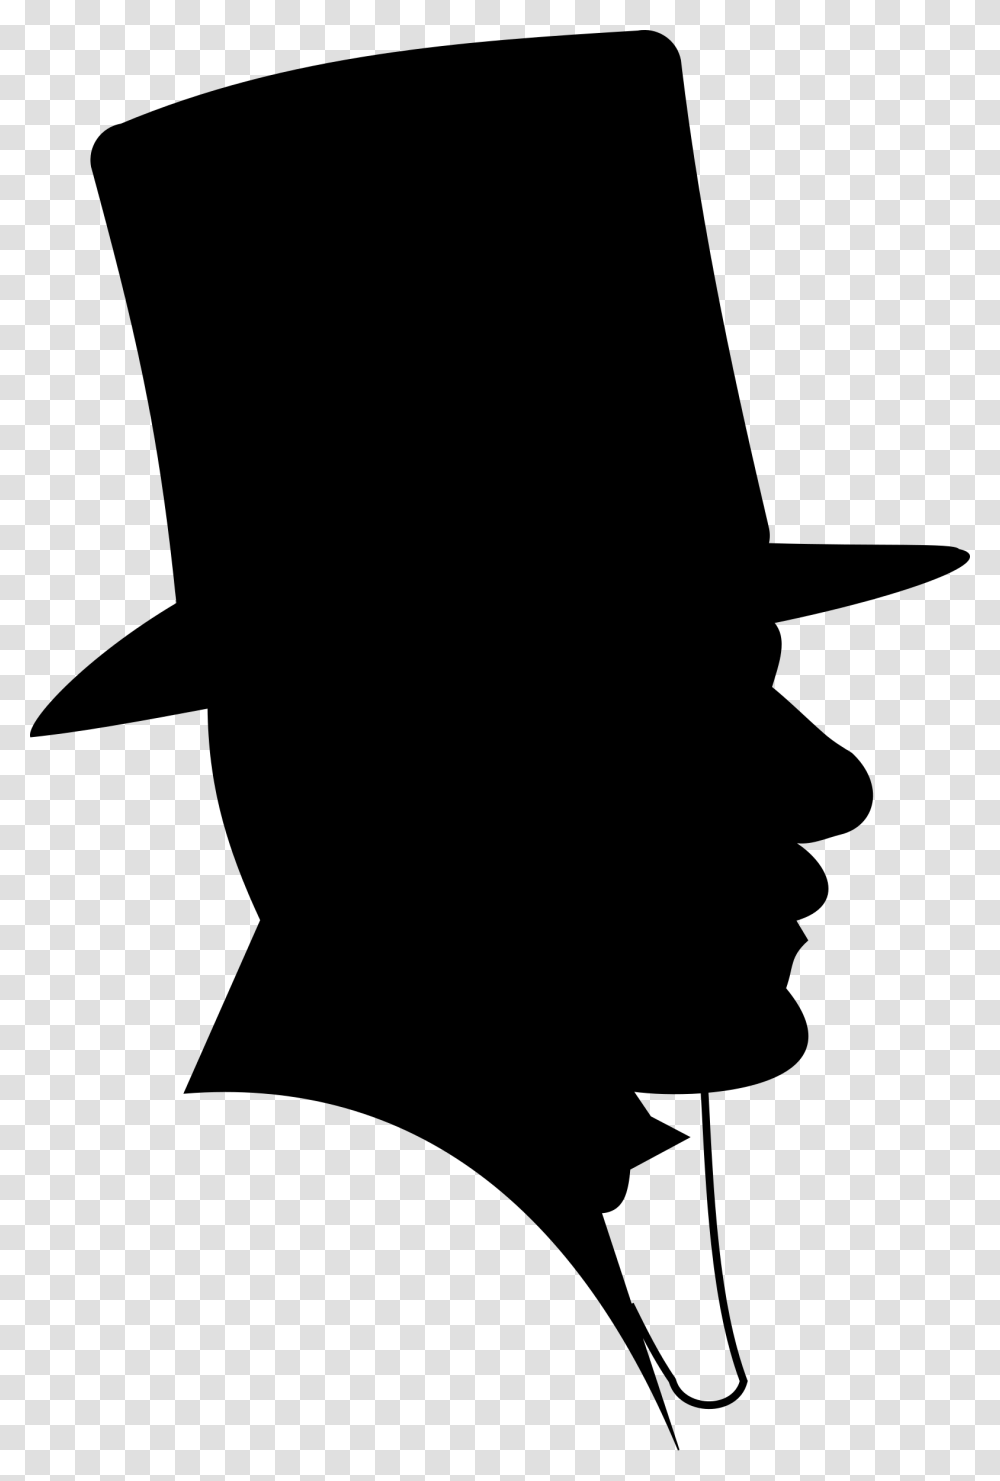 Public Domain Clip Art Image Victorian Man With Top Man In Top Hat Silhouette, Gray Transparent Png